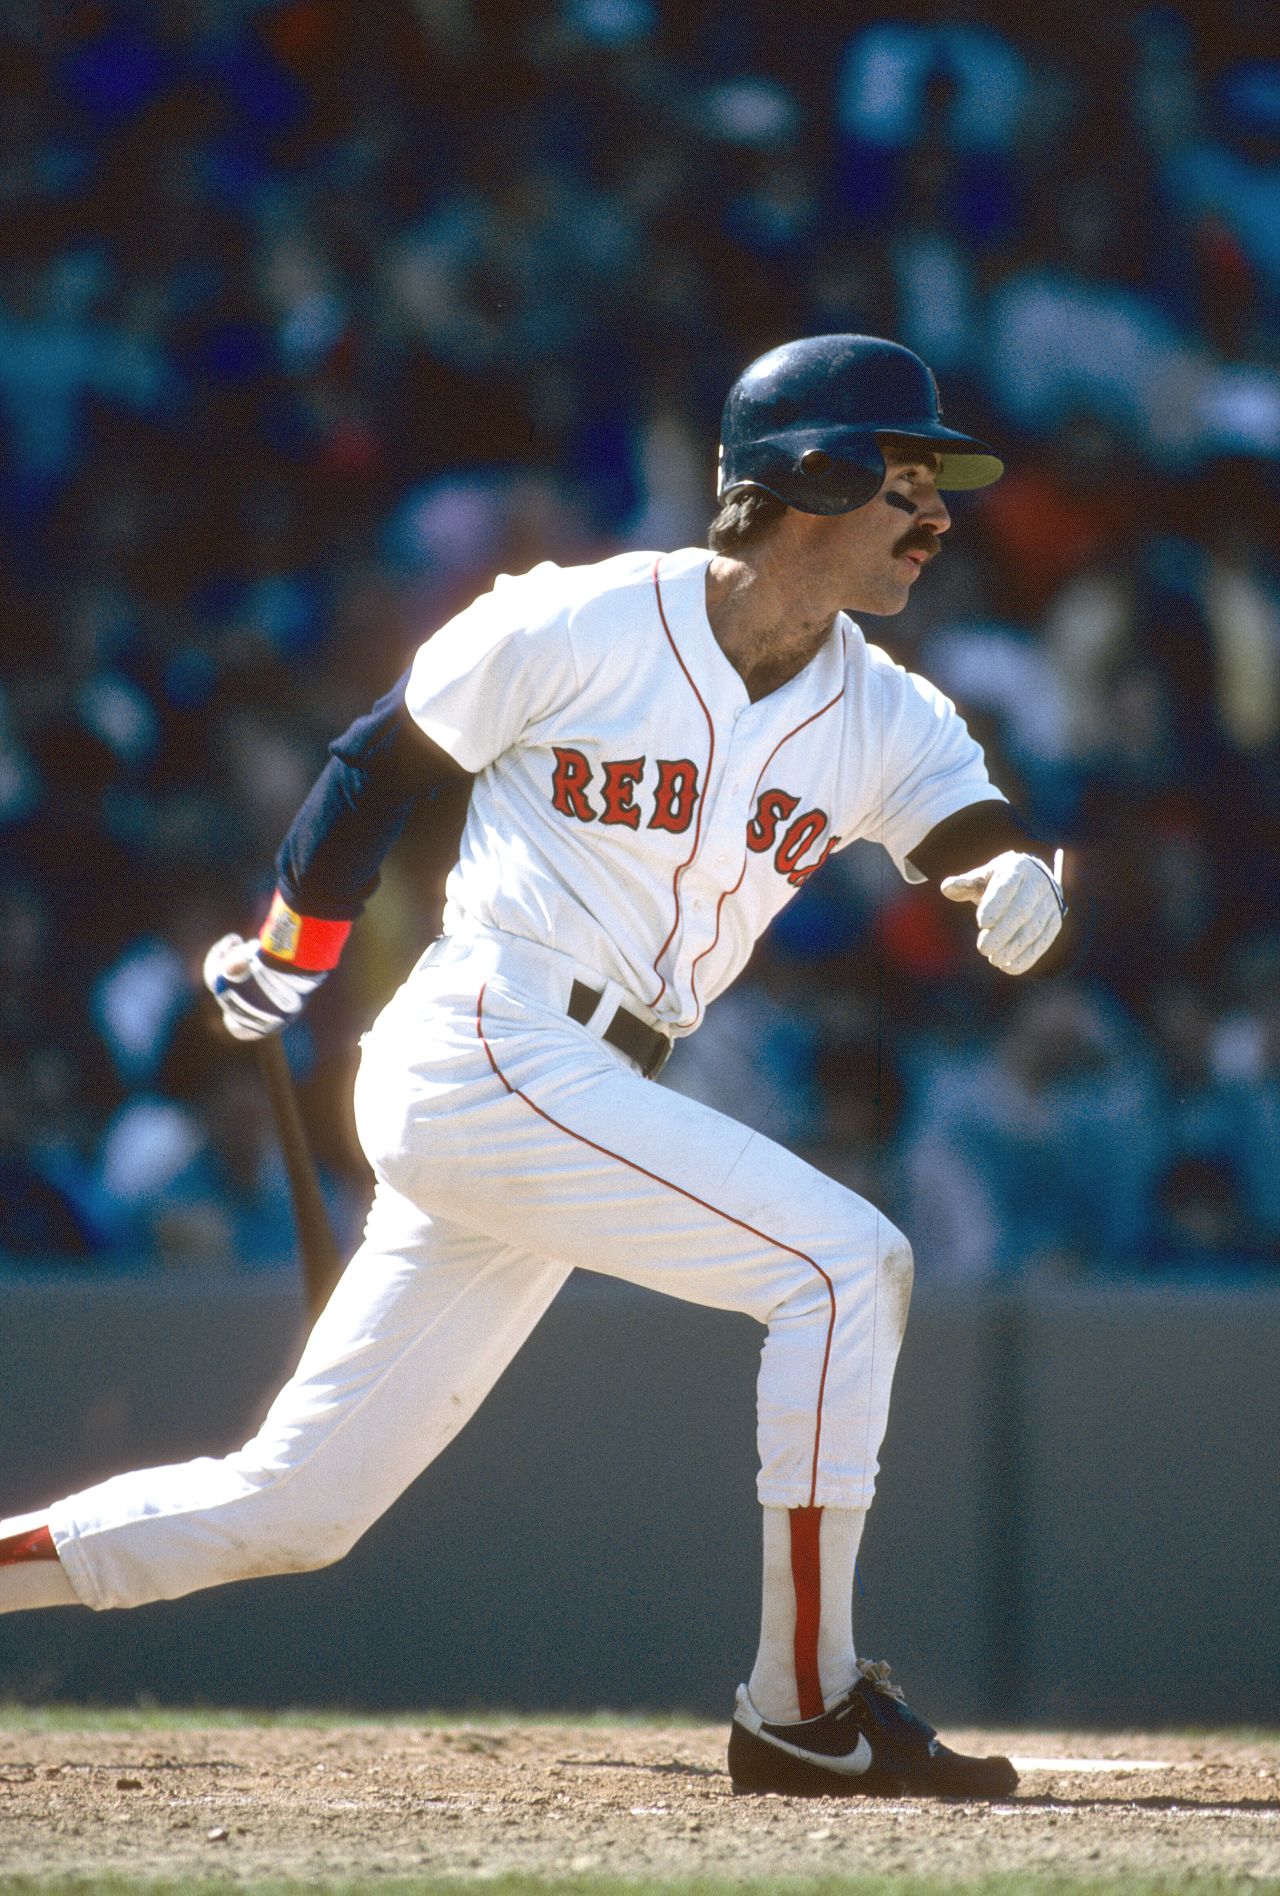 <a href="https://www.cnn.com/2019/05/27/us/bill-buckner-mlb-dead/index.html" target="_blank">Bill Buckner</a>, an elite hitter for 22 seasons whose All-Star career was overshadowed by an infamous fielding error he made in the 1986 World Series, died on May 27. He was 69.